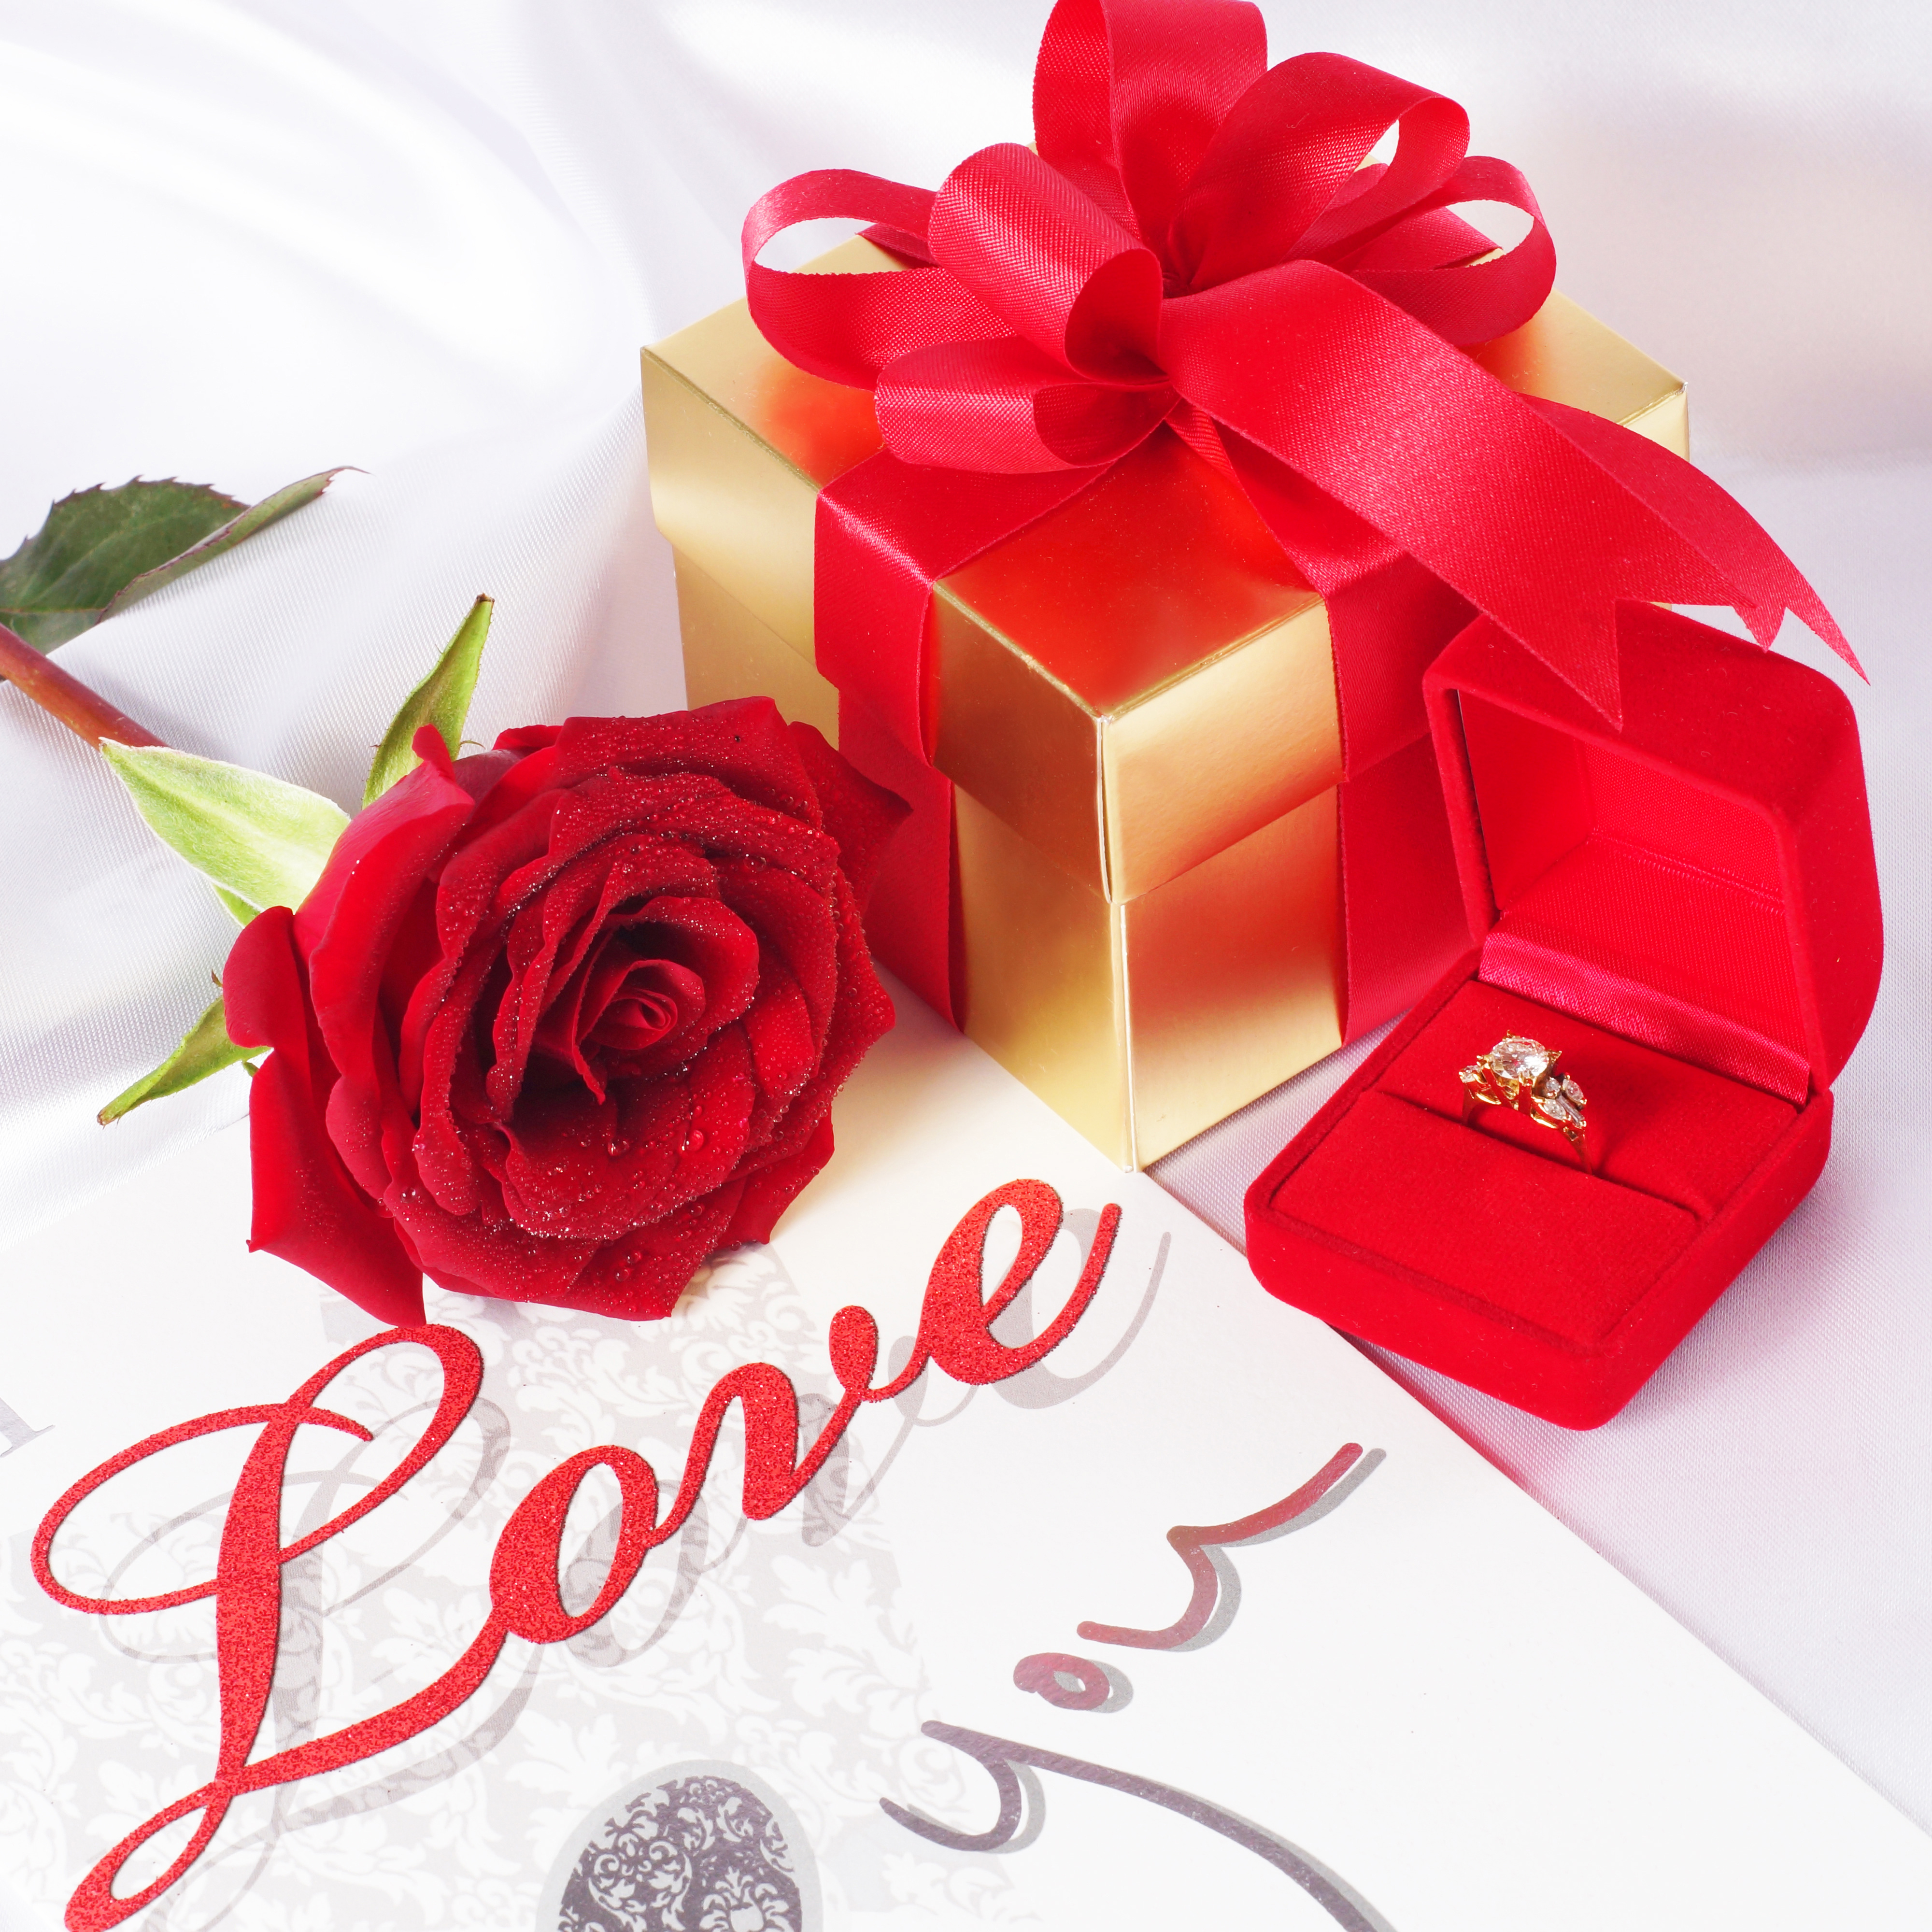 Love You Gift and Red Rose Background​-Quality Free Image and Transparent PNG Clipart